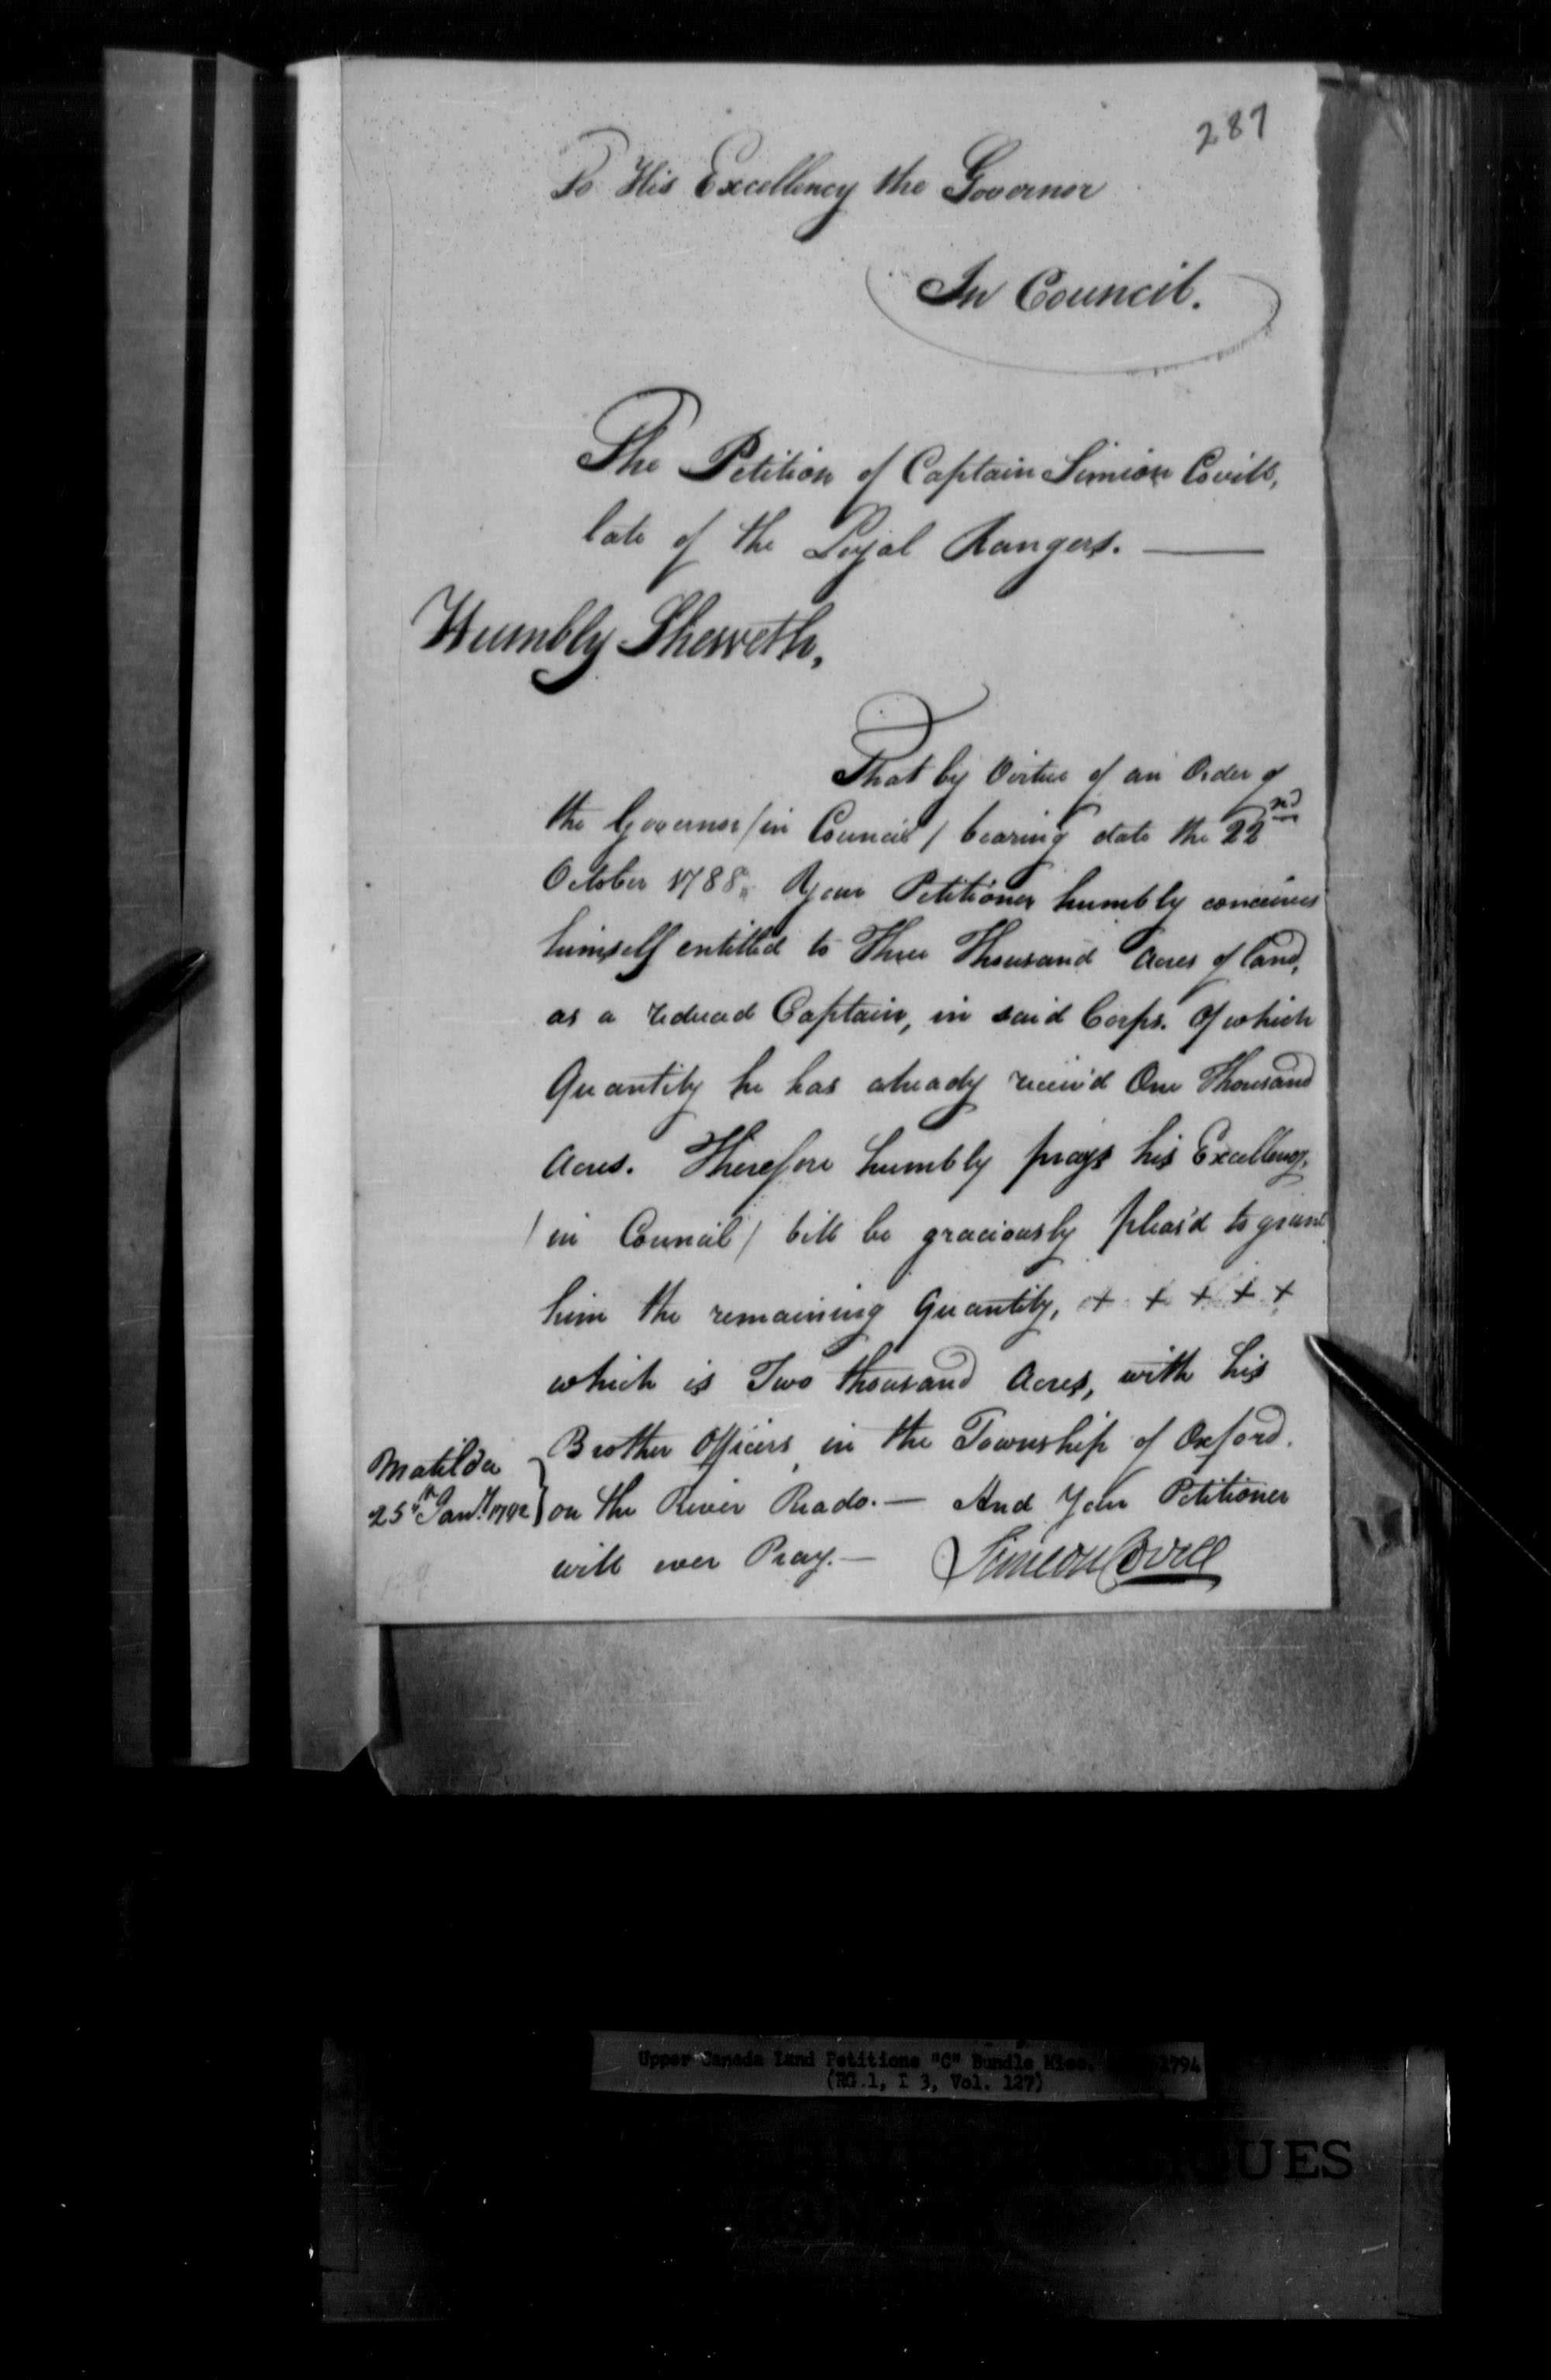 Title: Upper Canada Land Petitions (1763-1865) - Mikan Number: 205131 - Microform: c-1732